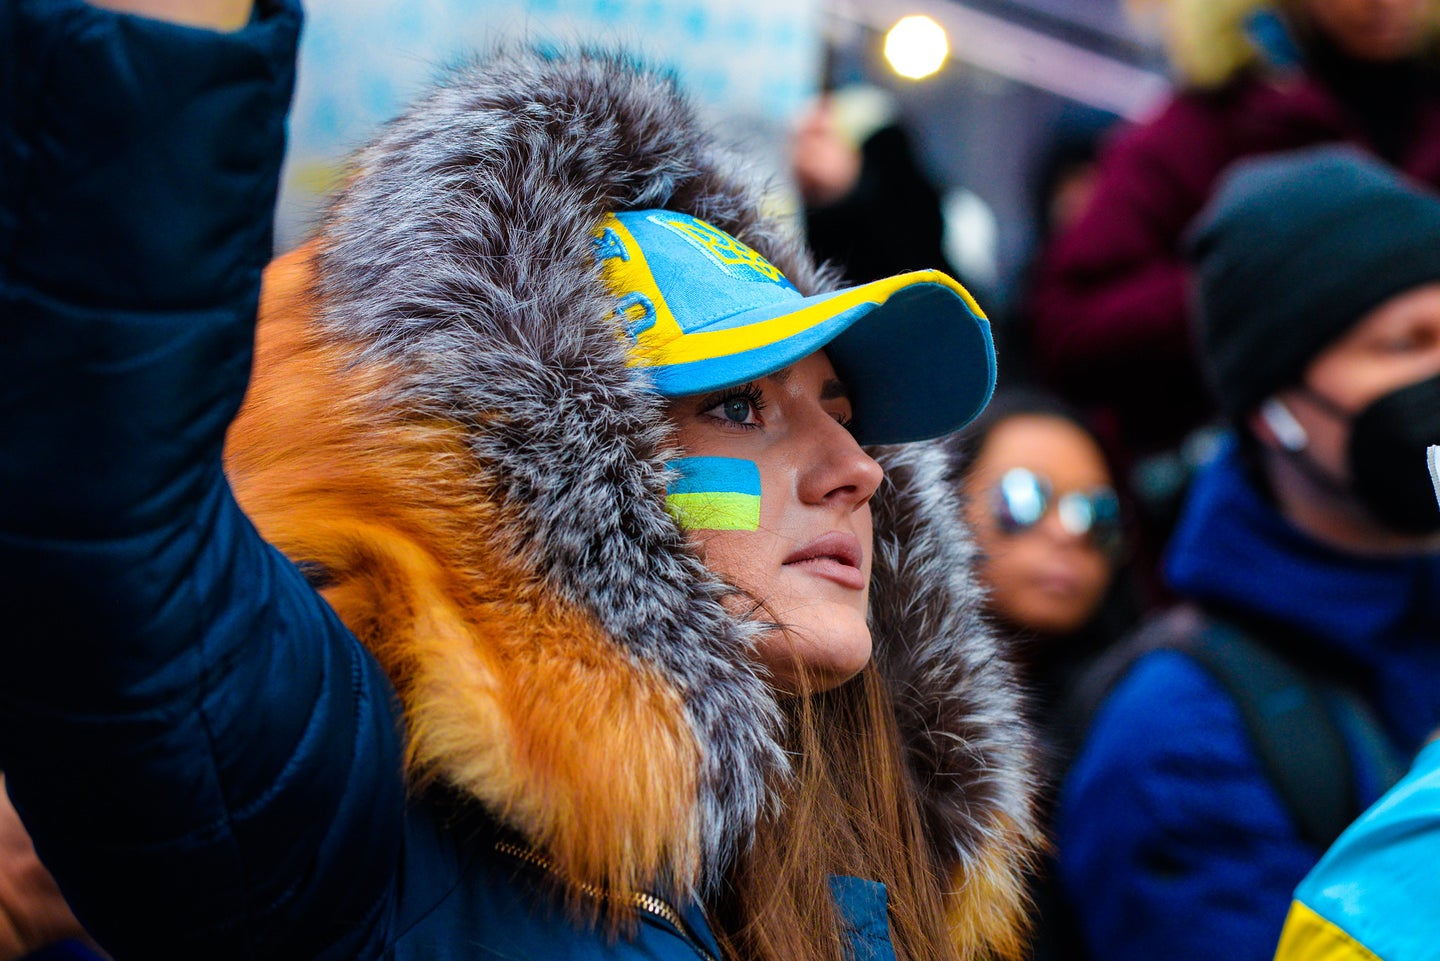 Portrait of a young women wearing face paint showing the Ukraine flag.